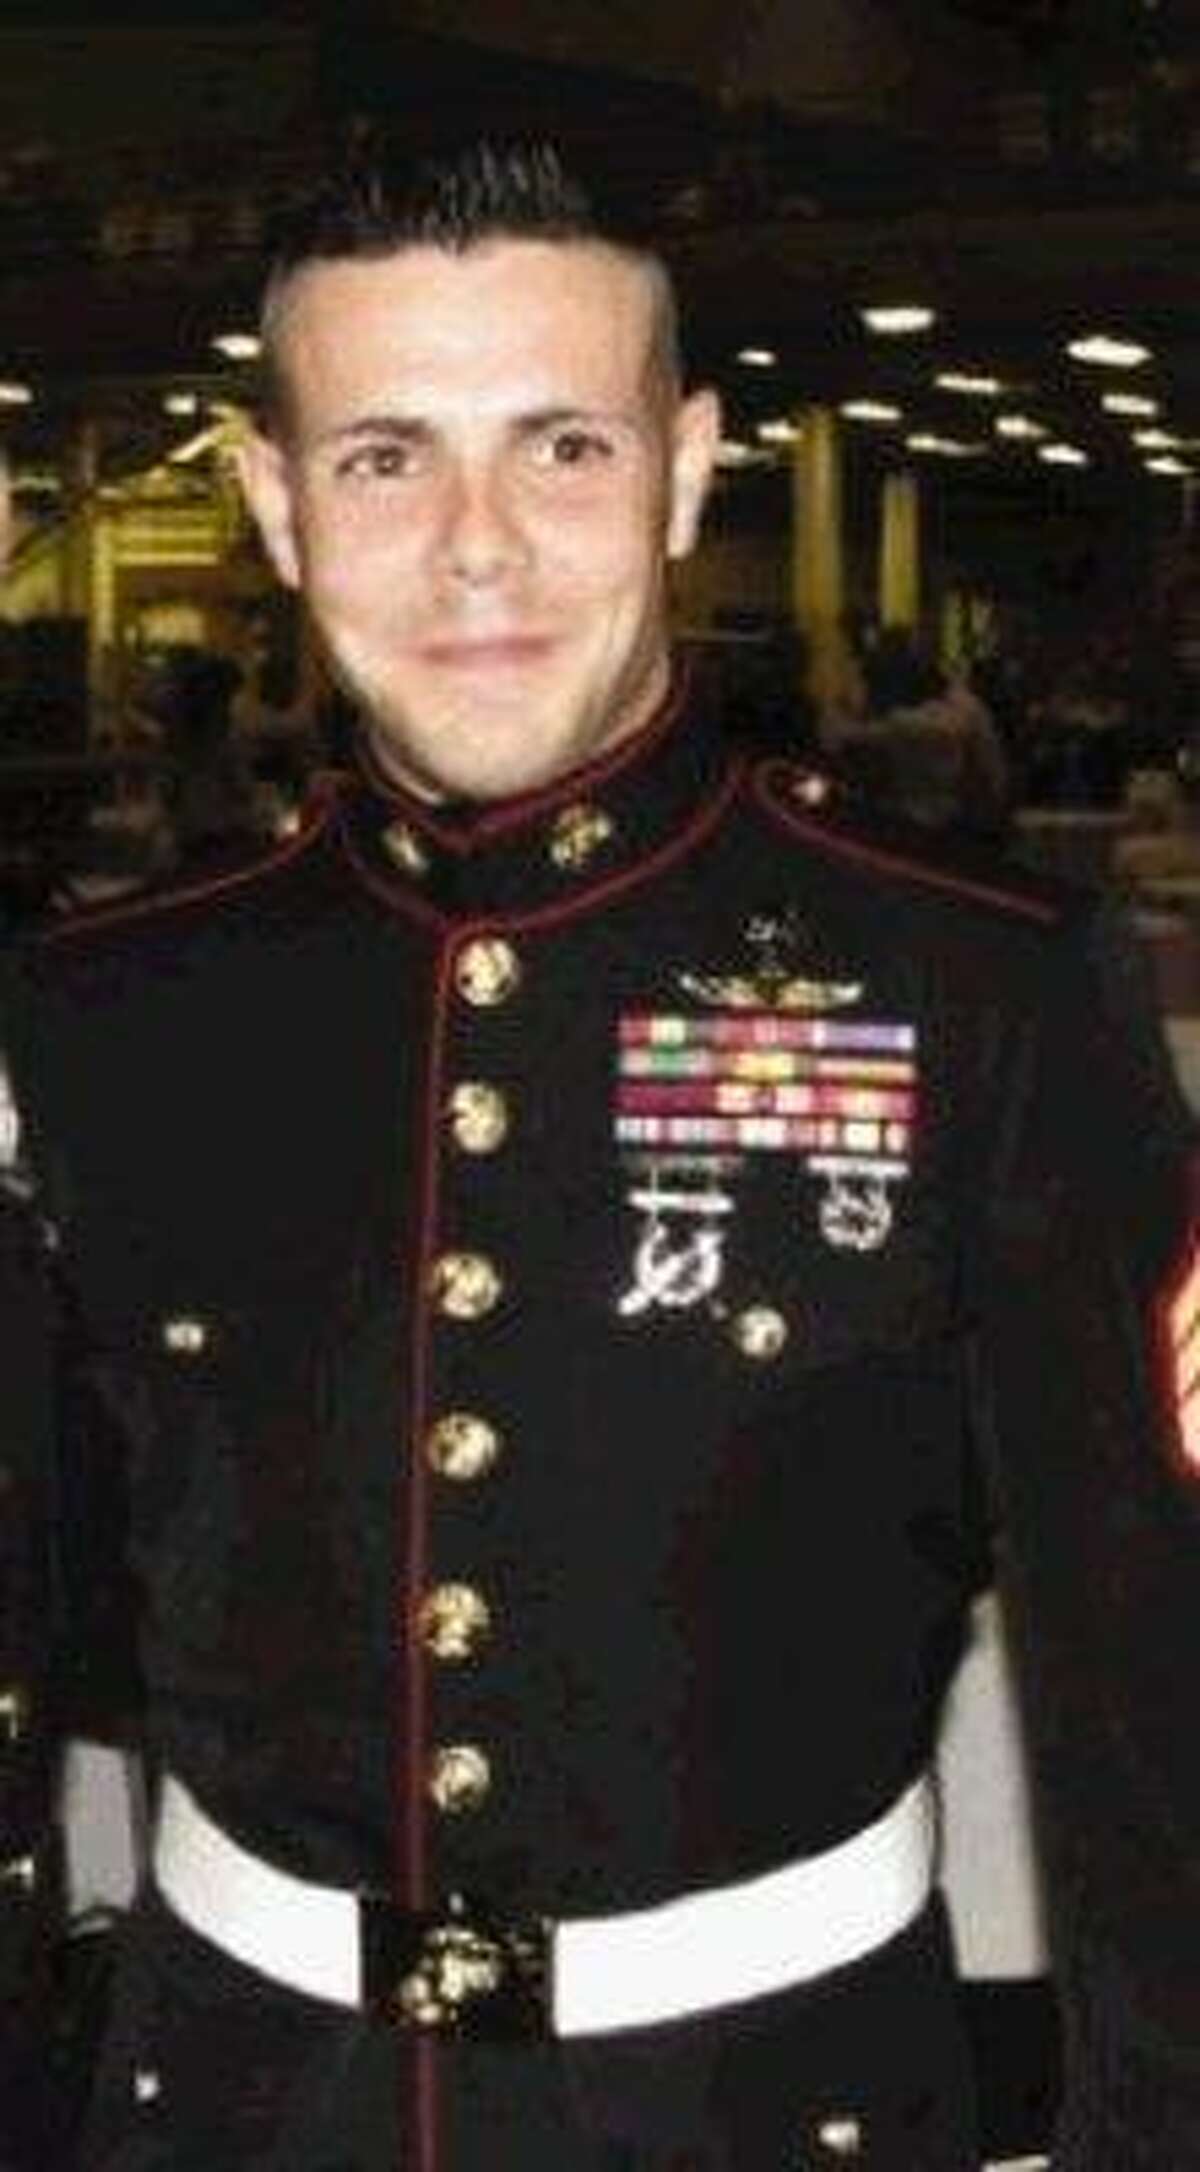 This undated photo shows Jesse Bernard Johnston III, 26, wearing a Marine dress uniform with ribbons and medals even though records show he never served in the Marine Corps.